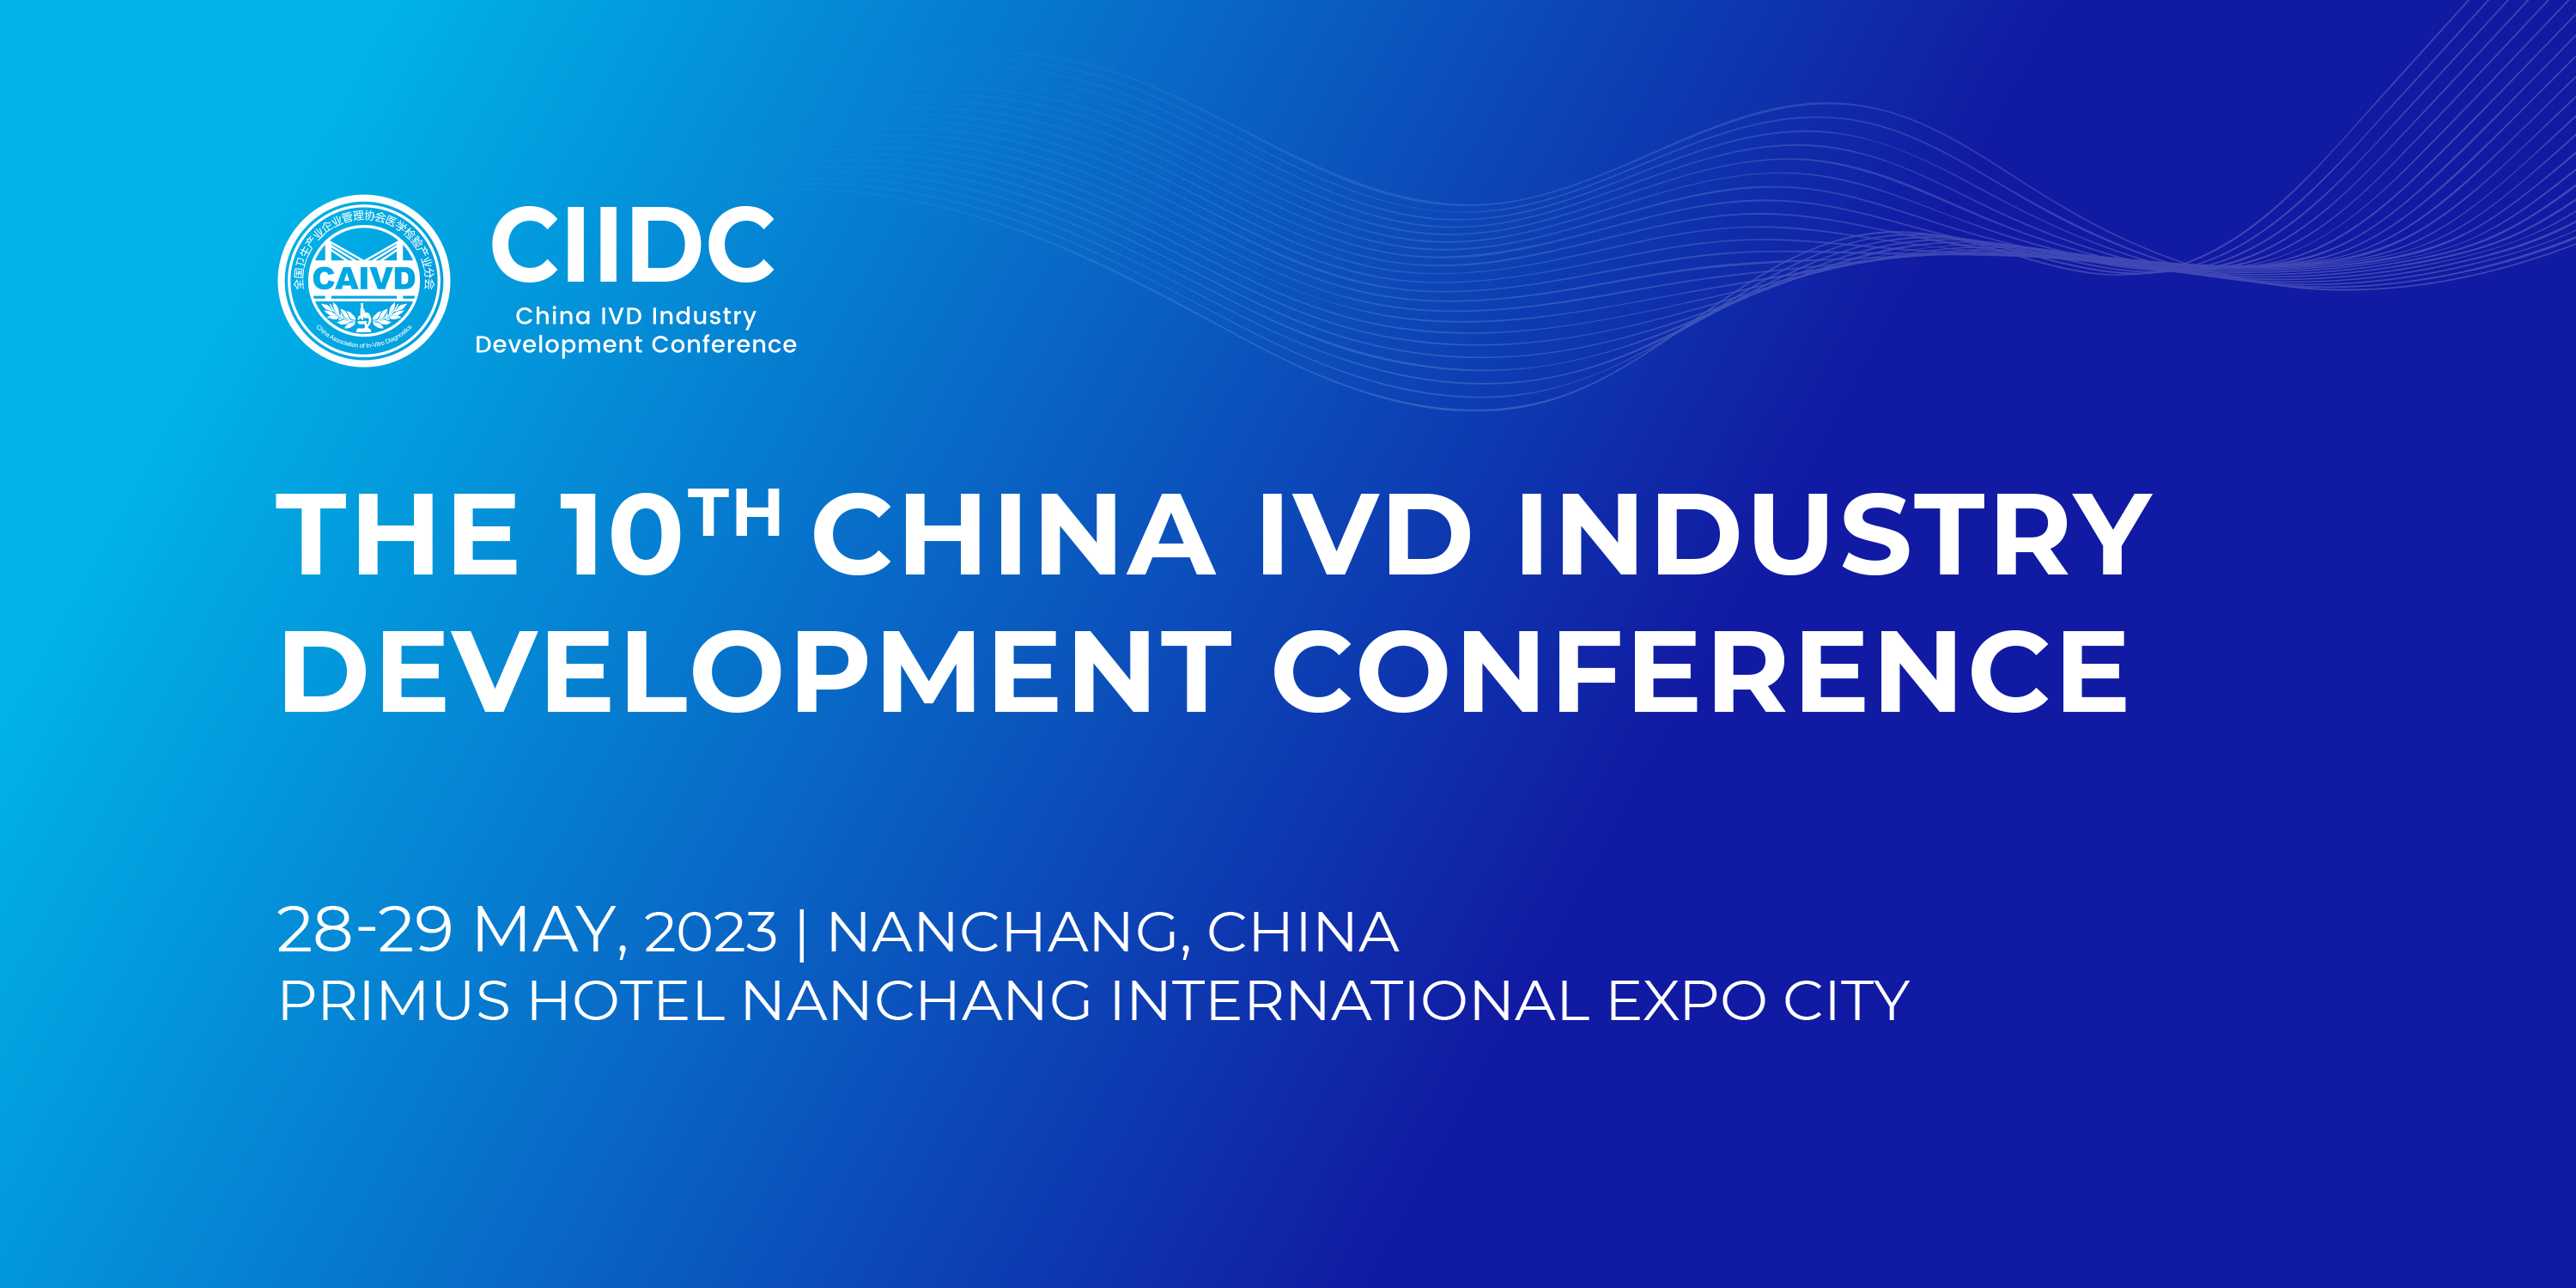 The 10th China IVD Industry Development Conference is planned to open